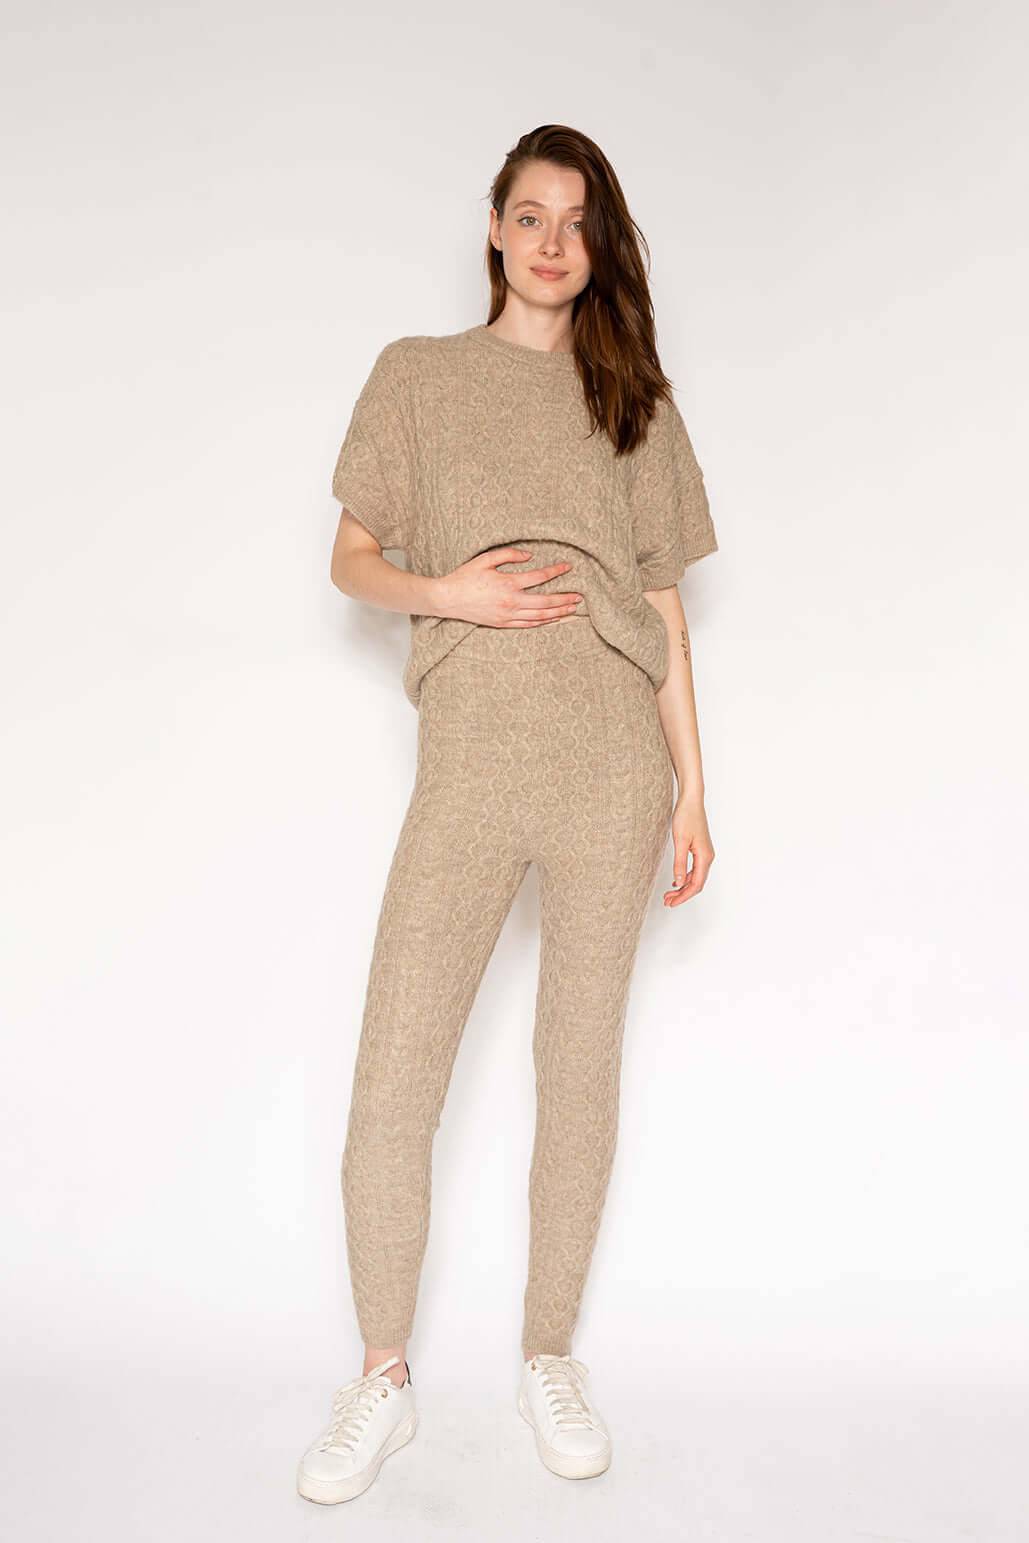 Cable Knit Legging